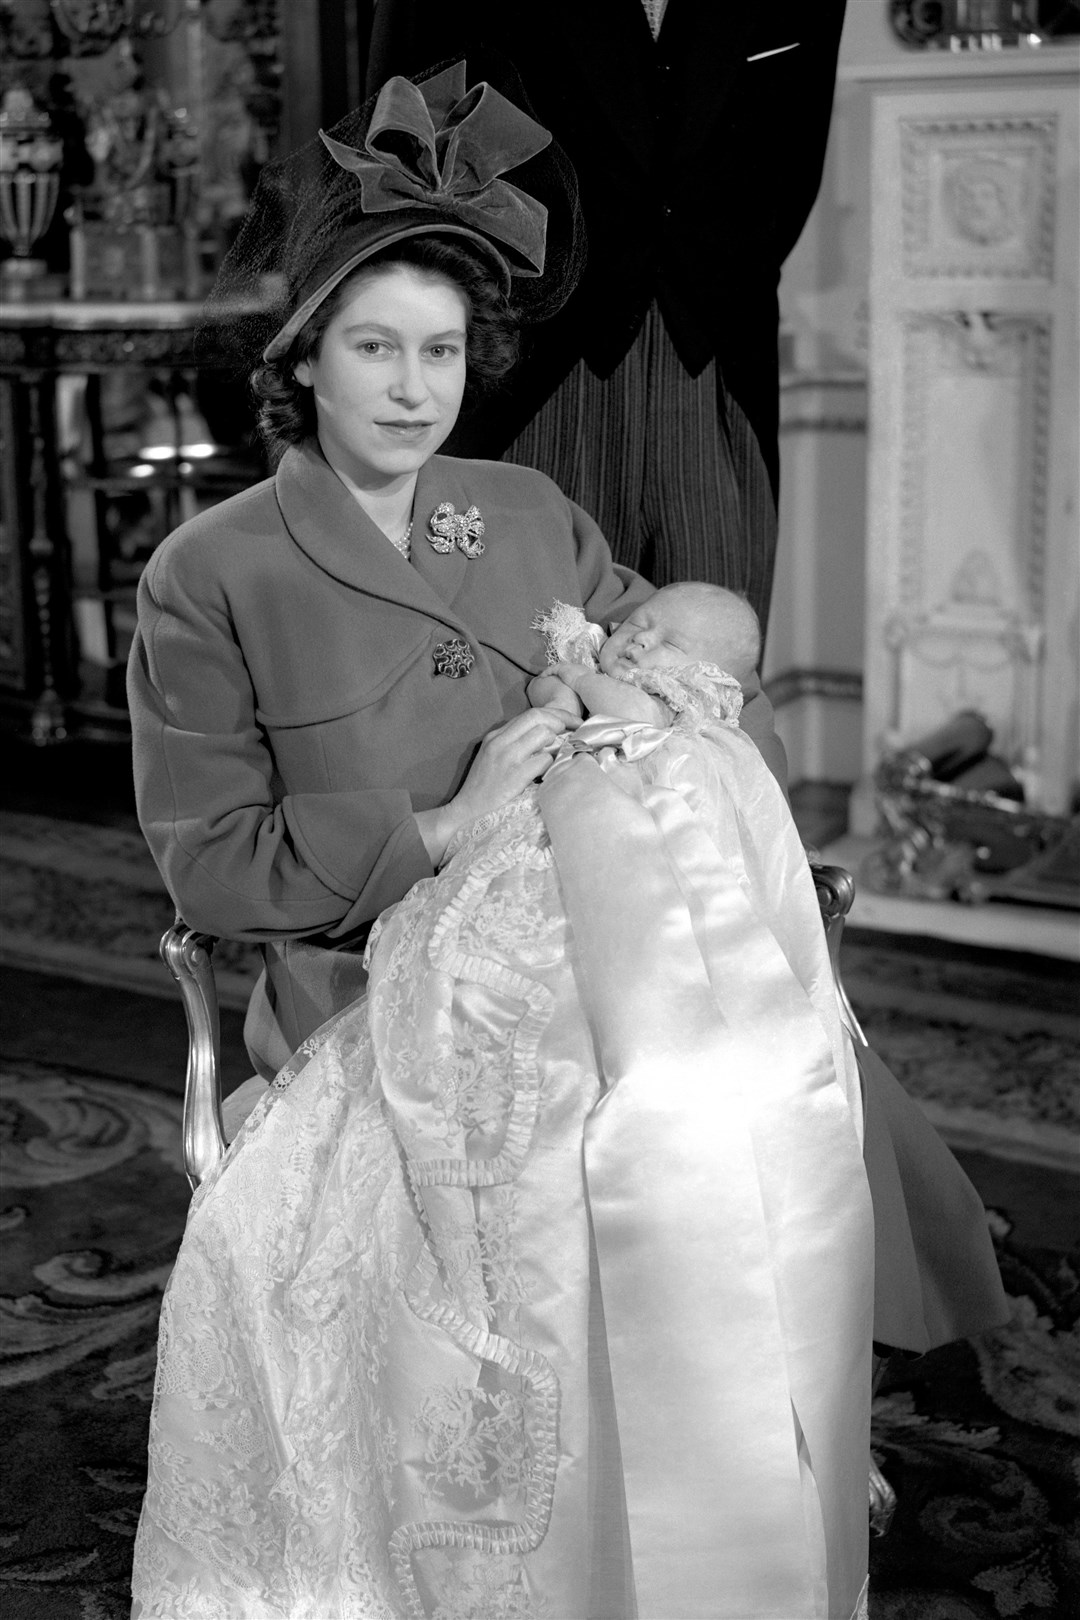 Princess Elizabeth, later Queen Elizabeth, holding her baby son Prince Charles at his christening in 1948 (PA)